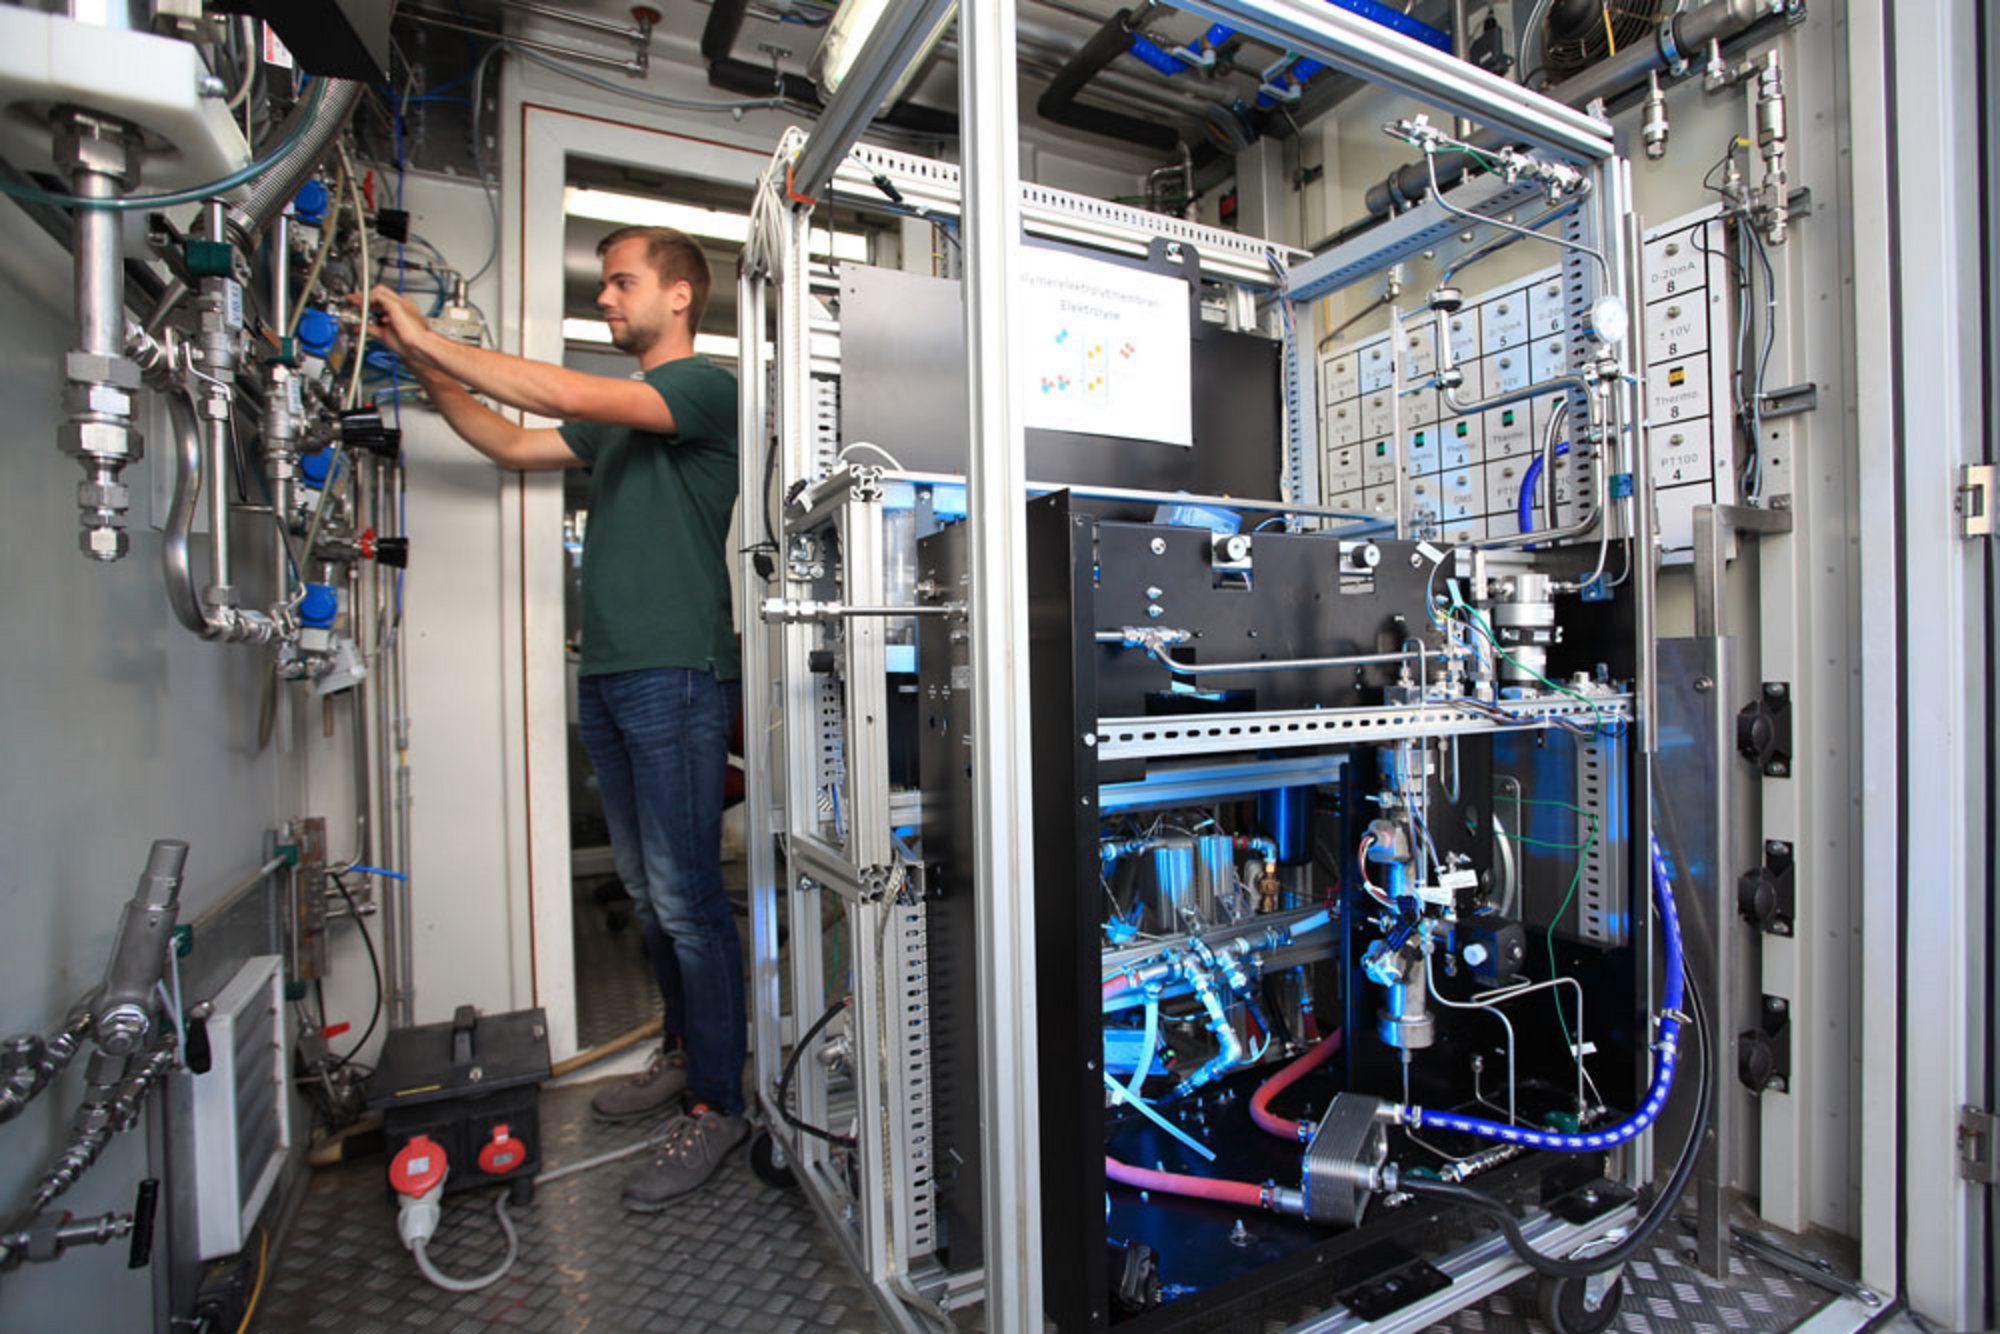 PEM-Single cell test stand